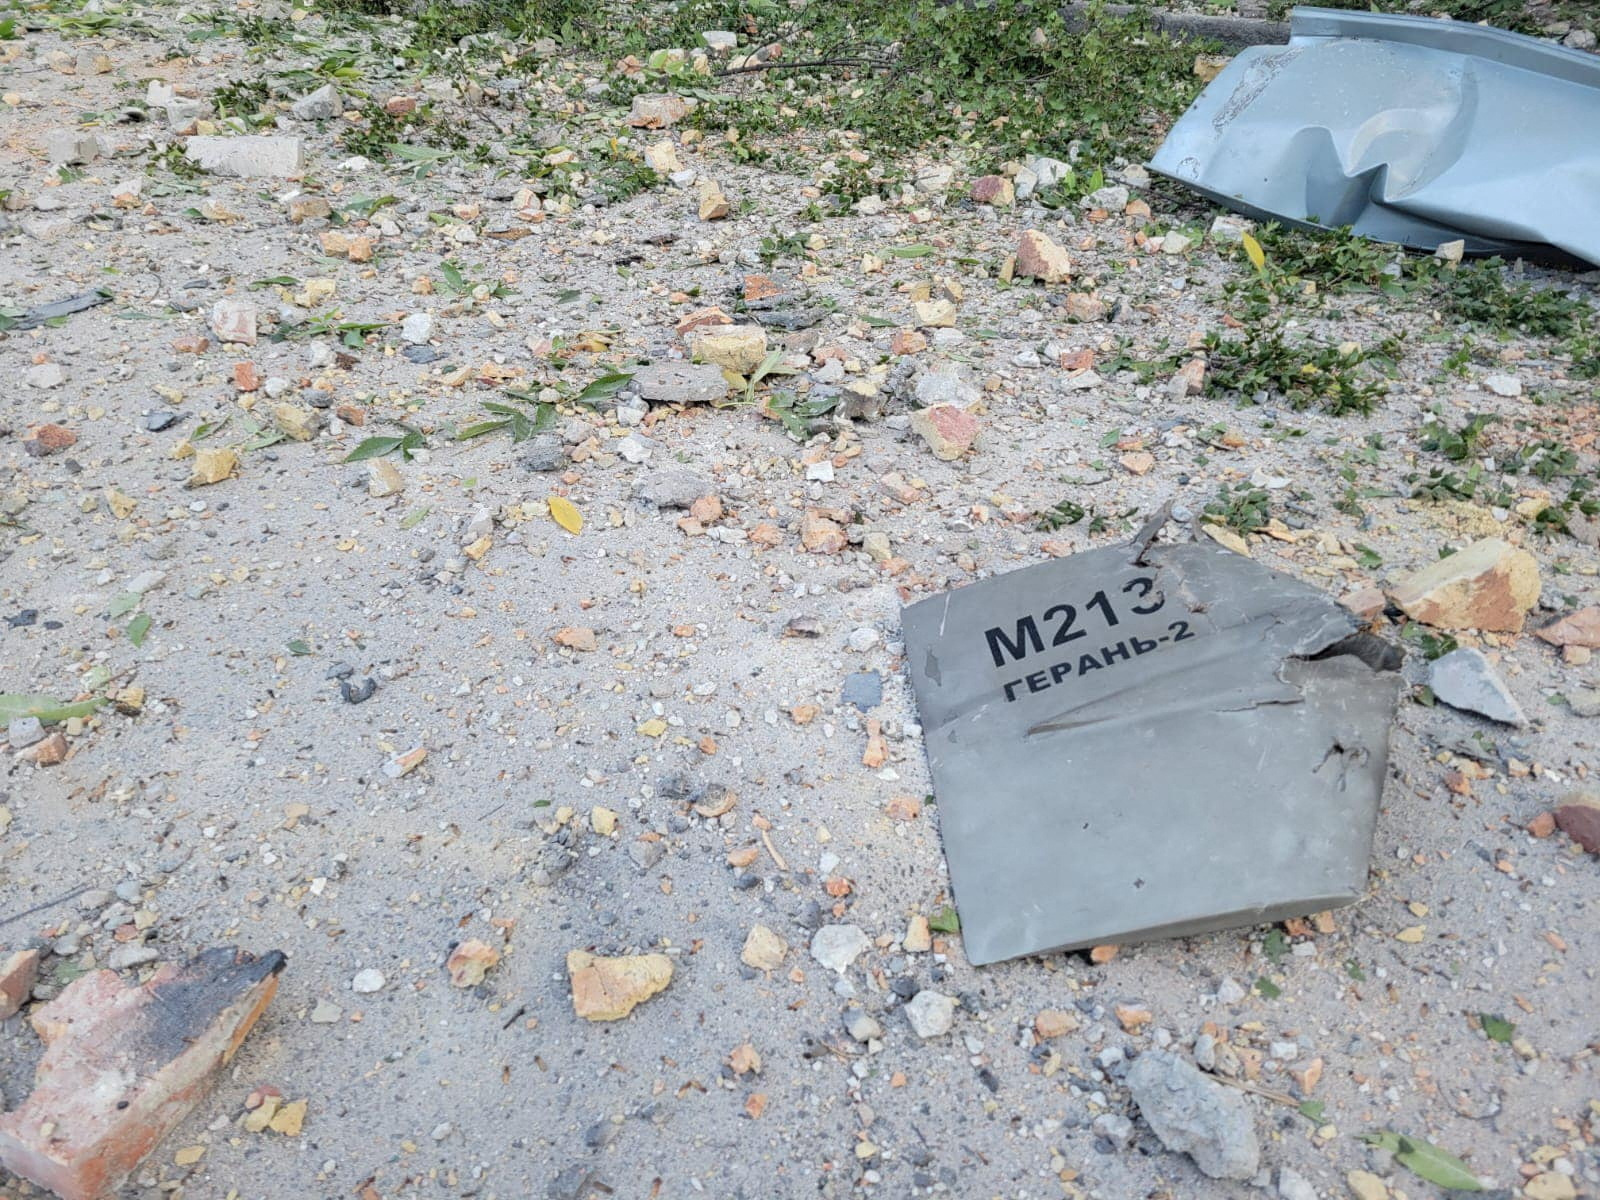 A part of an unmanned aerial vehicle, that Ukrainian authorities consider to be an Iranian made suicide drone Shahed-136, is seen after it was shot down in Odesa, Ukraine, on September 25.